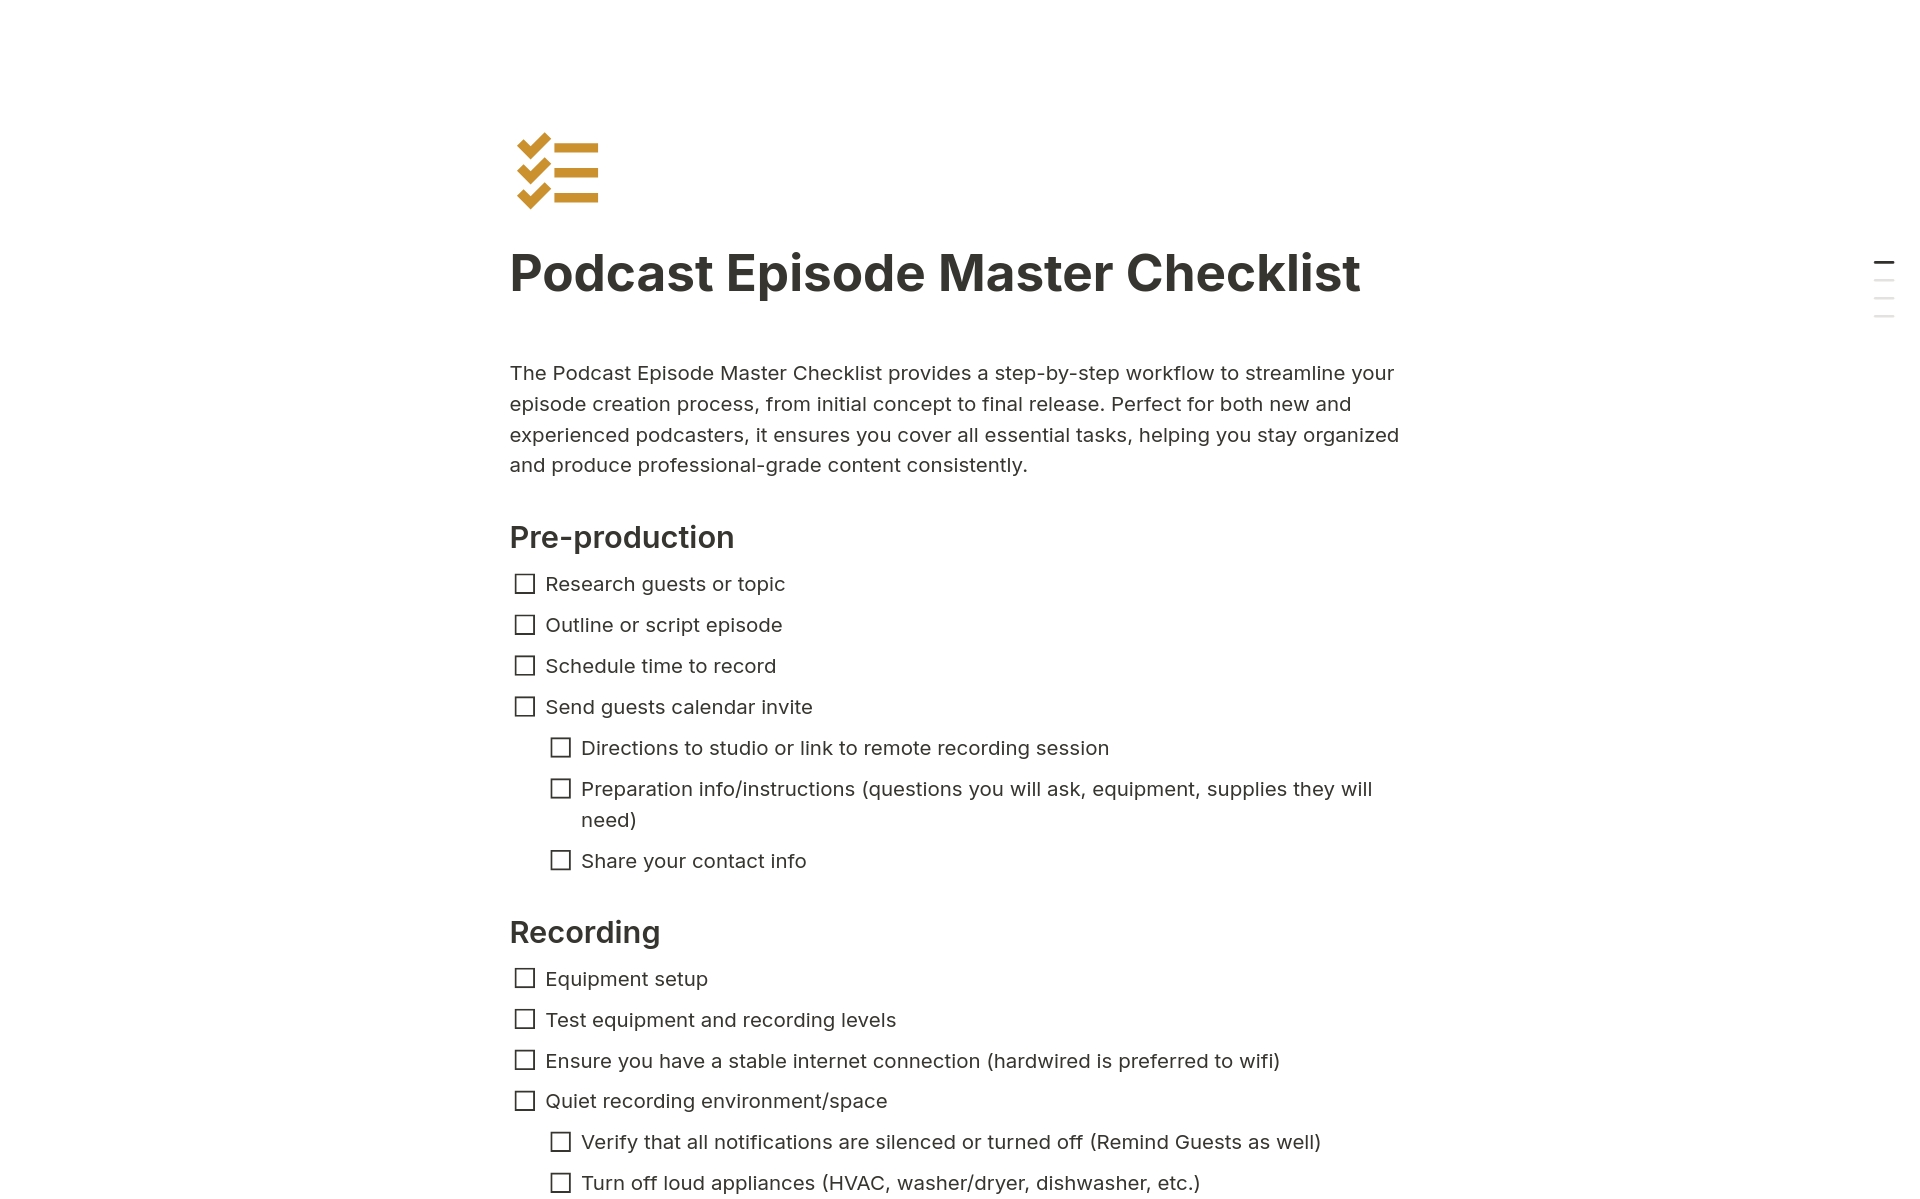 The Podcast Episode Master Checklist provides a step-by-step workflow to streamline your episode creation process, from initial concept to final release.